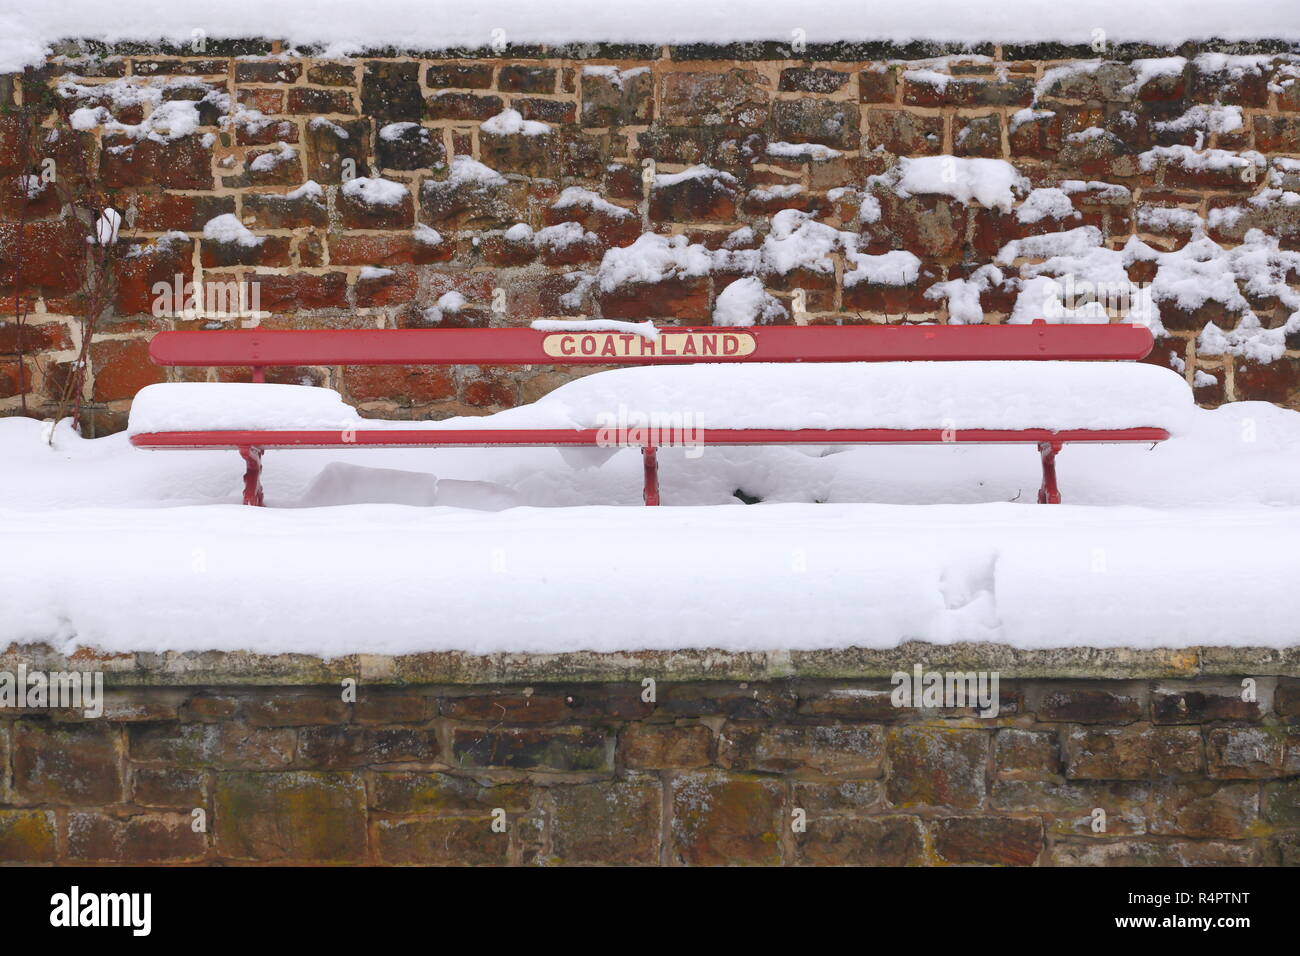 Thick snow covers a bench on the platform at Goathland Station on the North Yorkshire Moors Railway Stock Photo